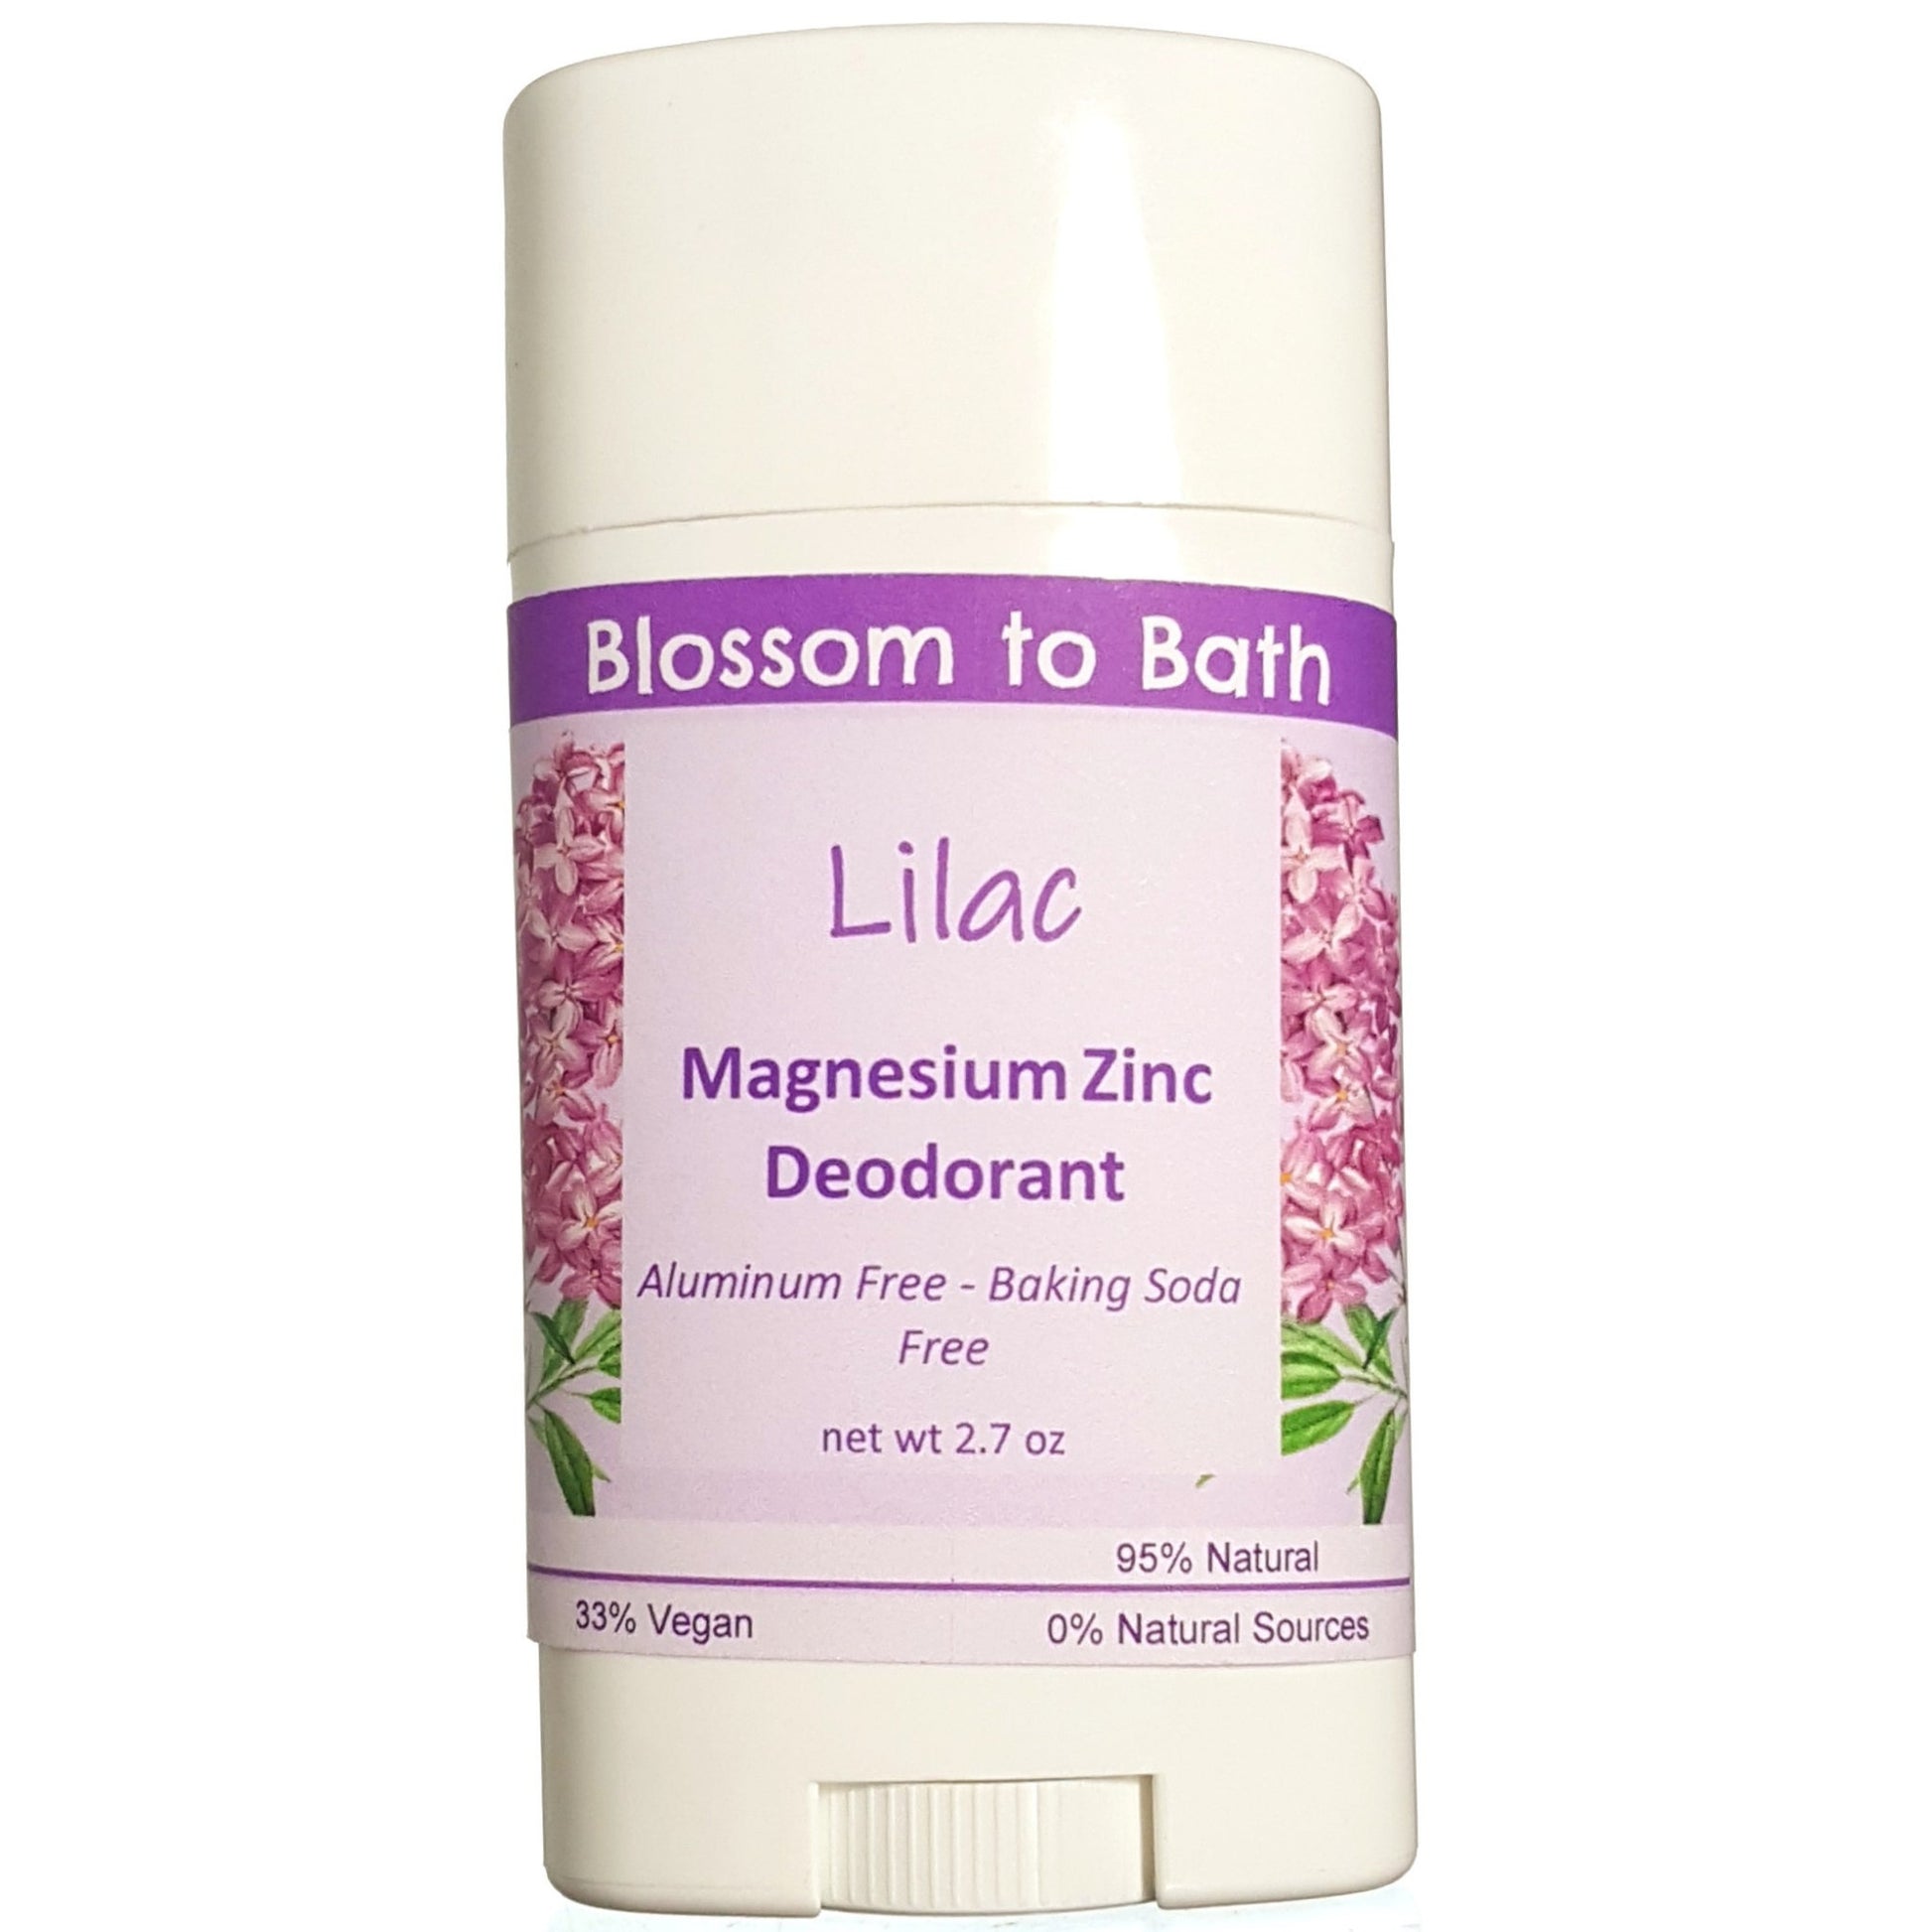 Buy Blossom to Bath Lilac Magnesium Zinc Deodorant from Flowersong Soap Studio.  Long lasting protection made from organic botanicals and butters, made without baking soda, tested in the Arizona heat  The scent of a freshly blooming lilac bush, the embodiment of spring flowers.